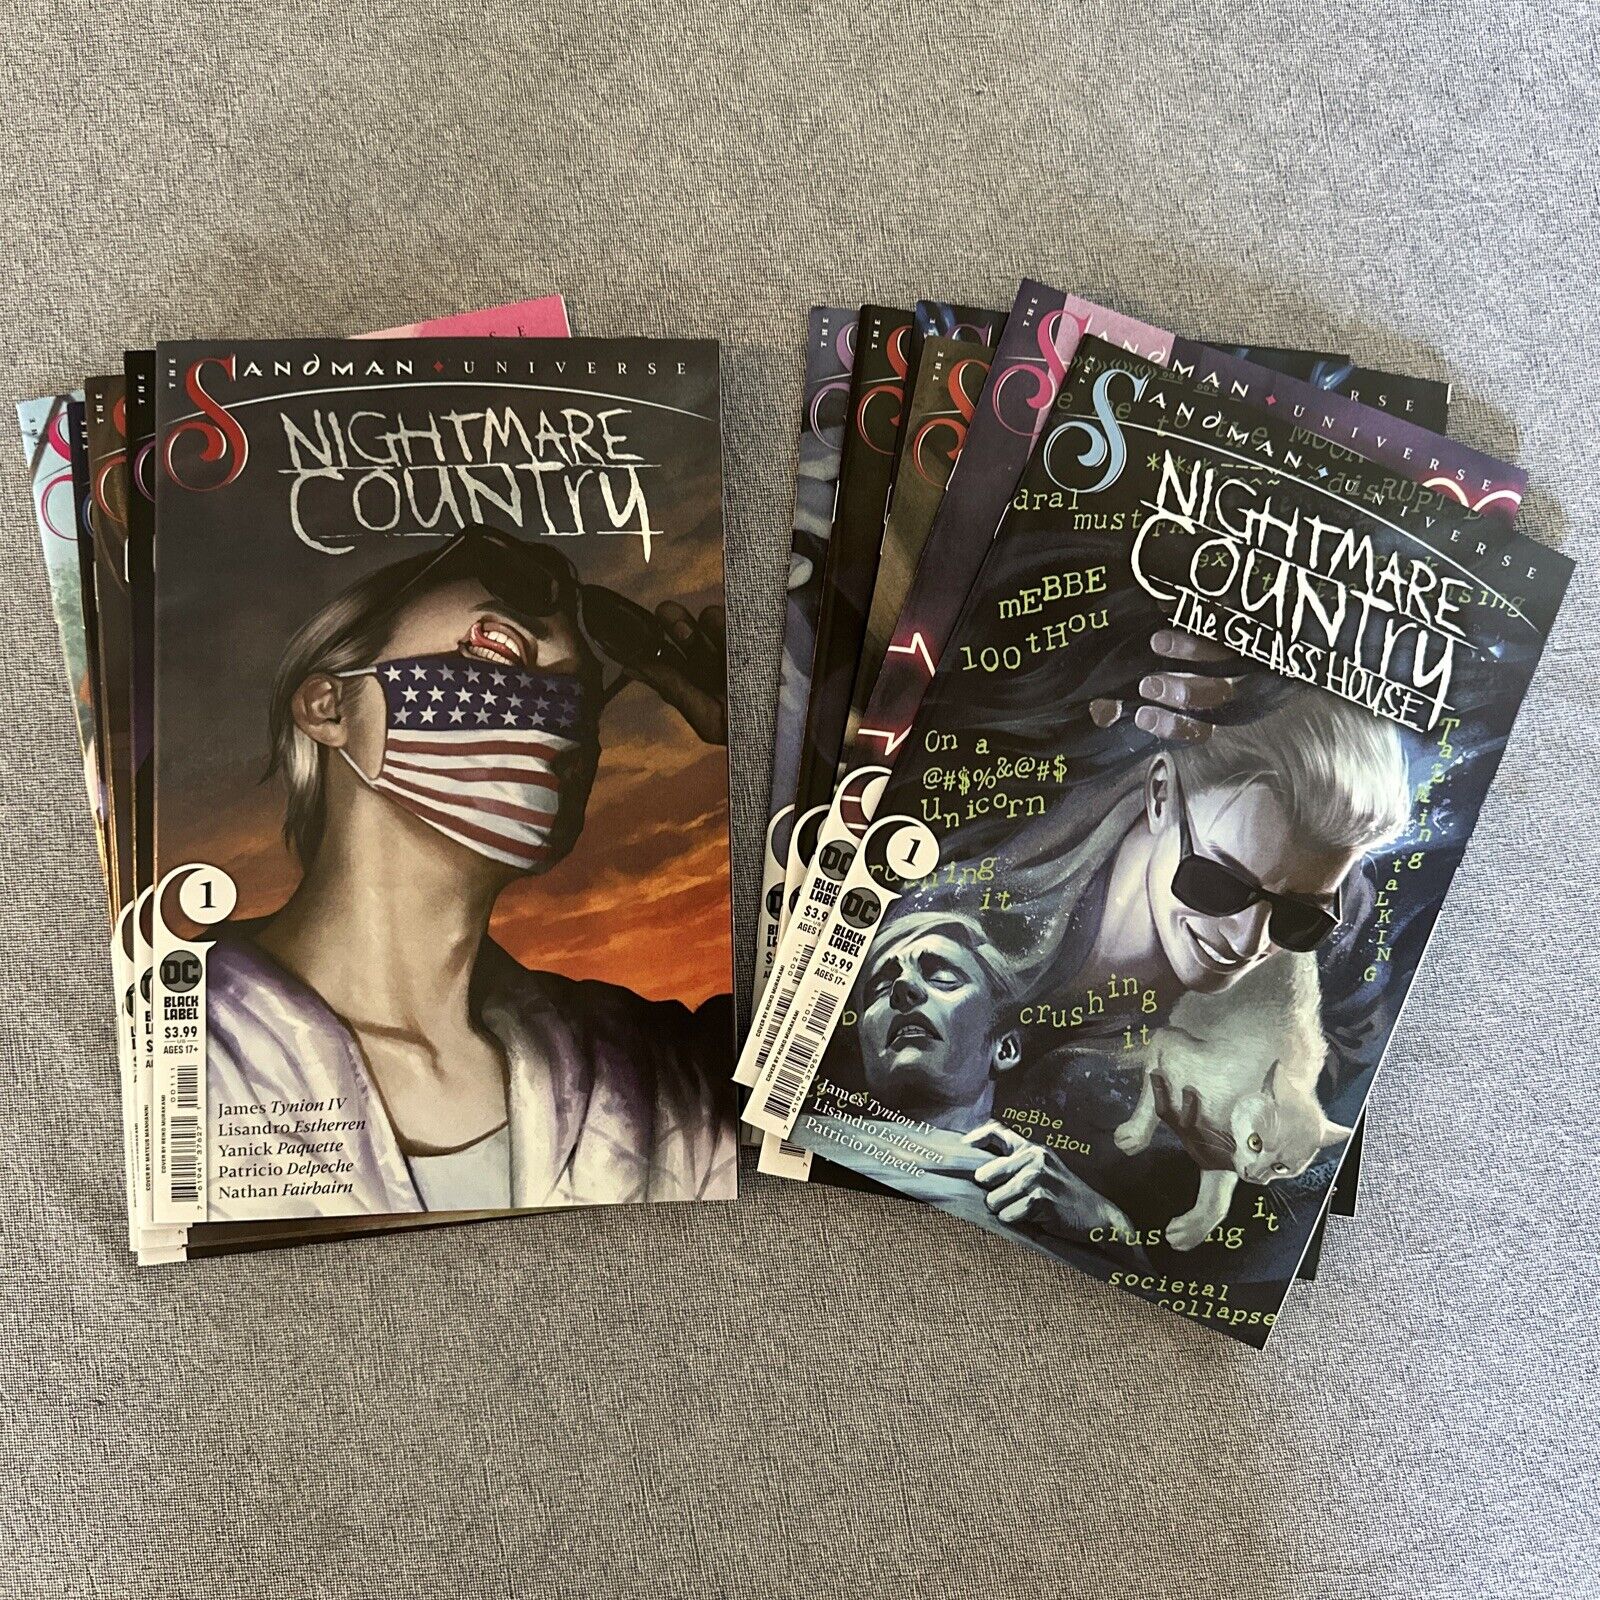 Sandman Universe Nightmare Country #1-6 And The Glass House #1-6 Both Sets Lot